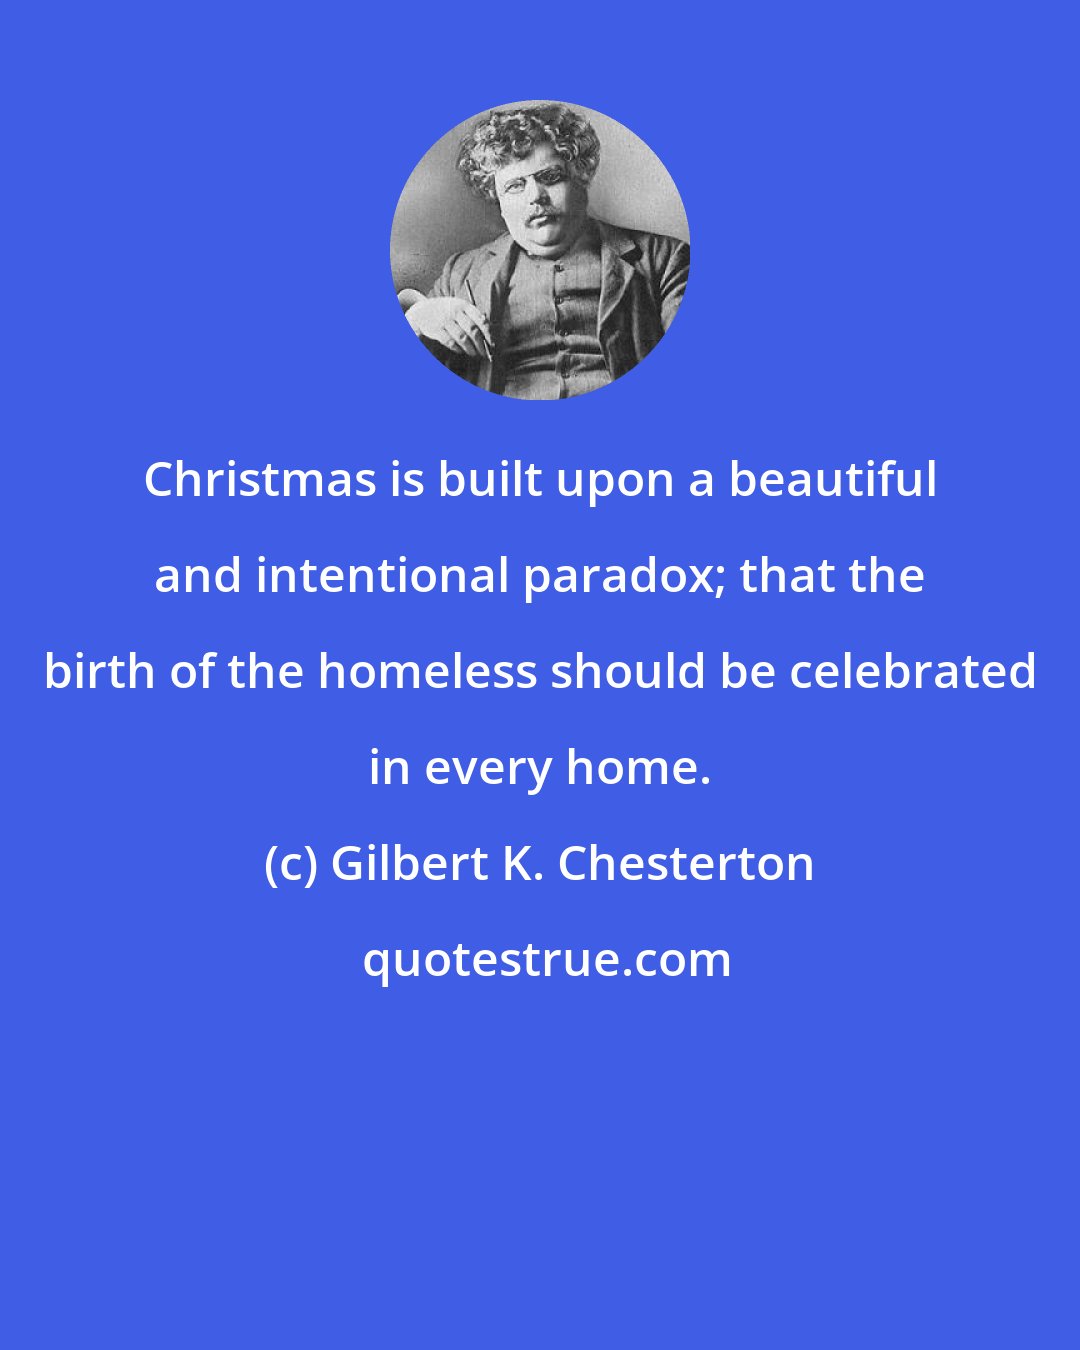 Gilbert K. Chesterton: Christmas is built upon a beautiful and intentional paradox; that the birth of the homeless should be celebrated in every home.